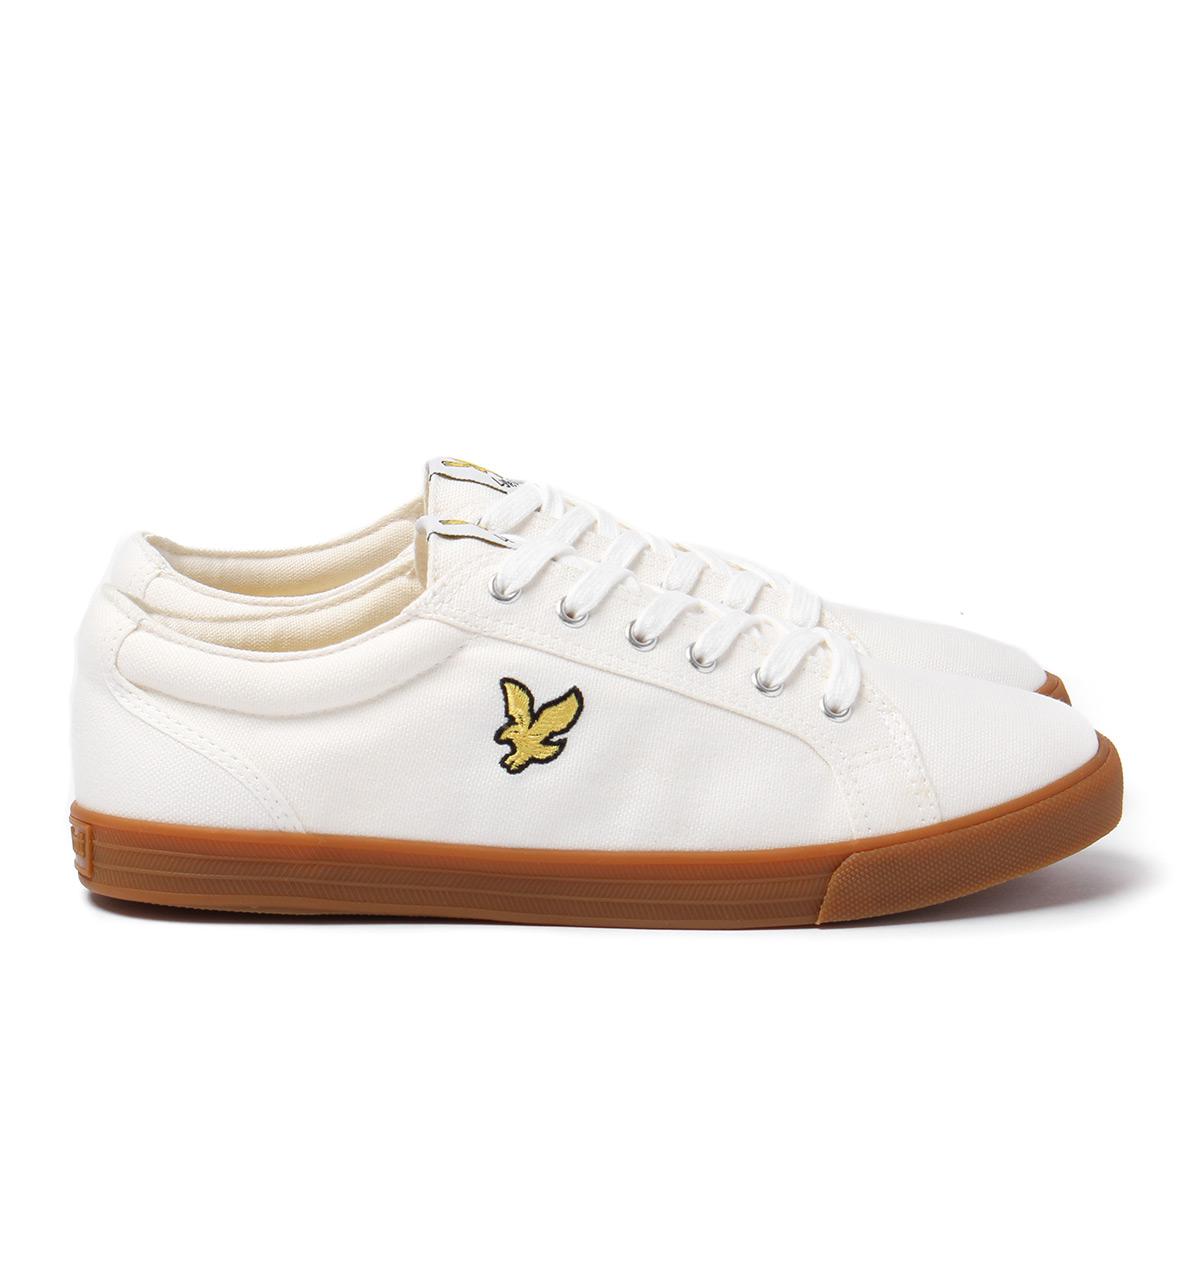 New Mens Branded Lyle And Scott Casual Canvas Lace Up Pumps Trainers Size 6-12 